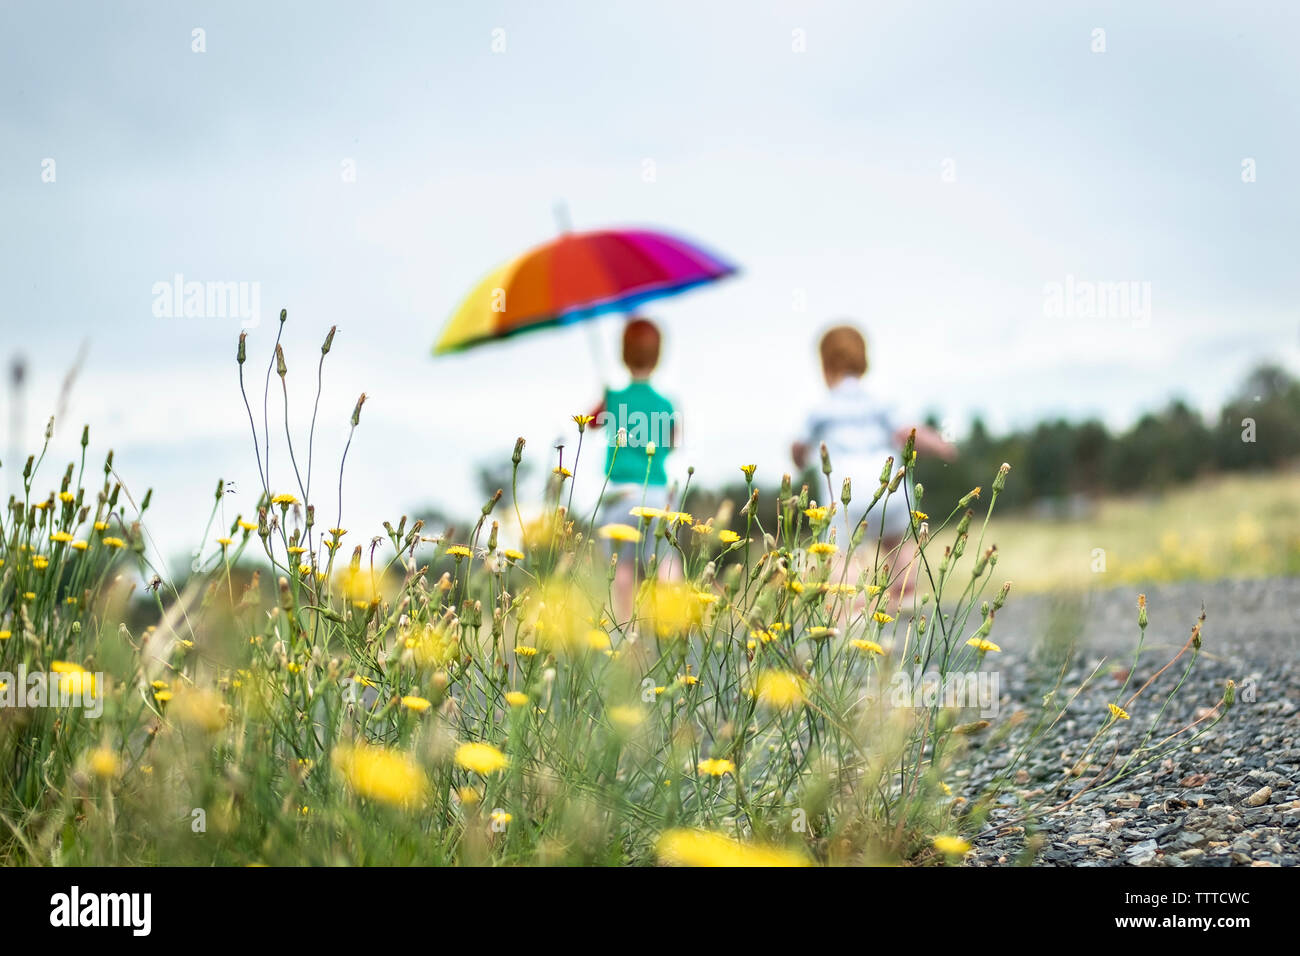 Two kids walking in the rain with a rainbow umbrella Stock Photo